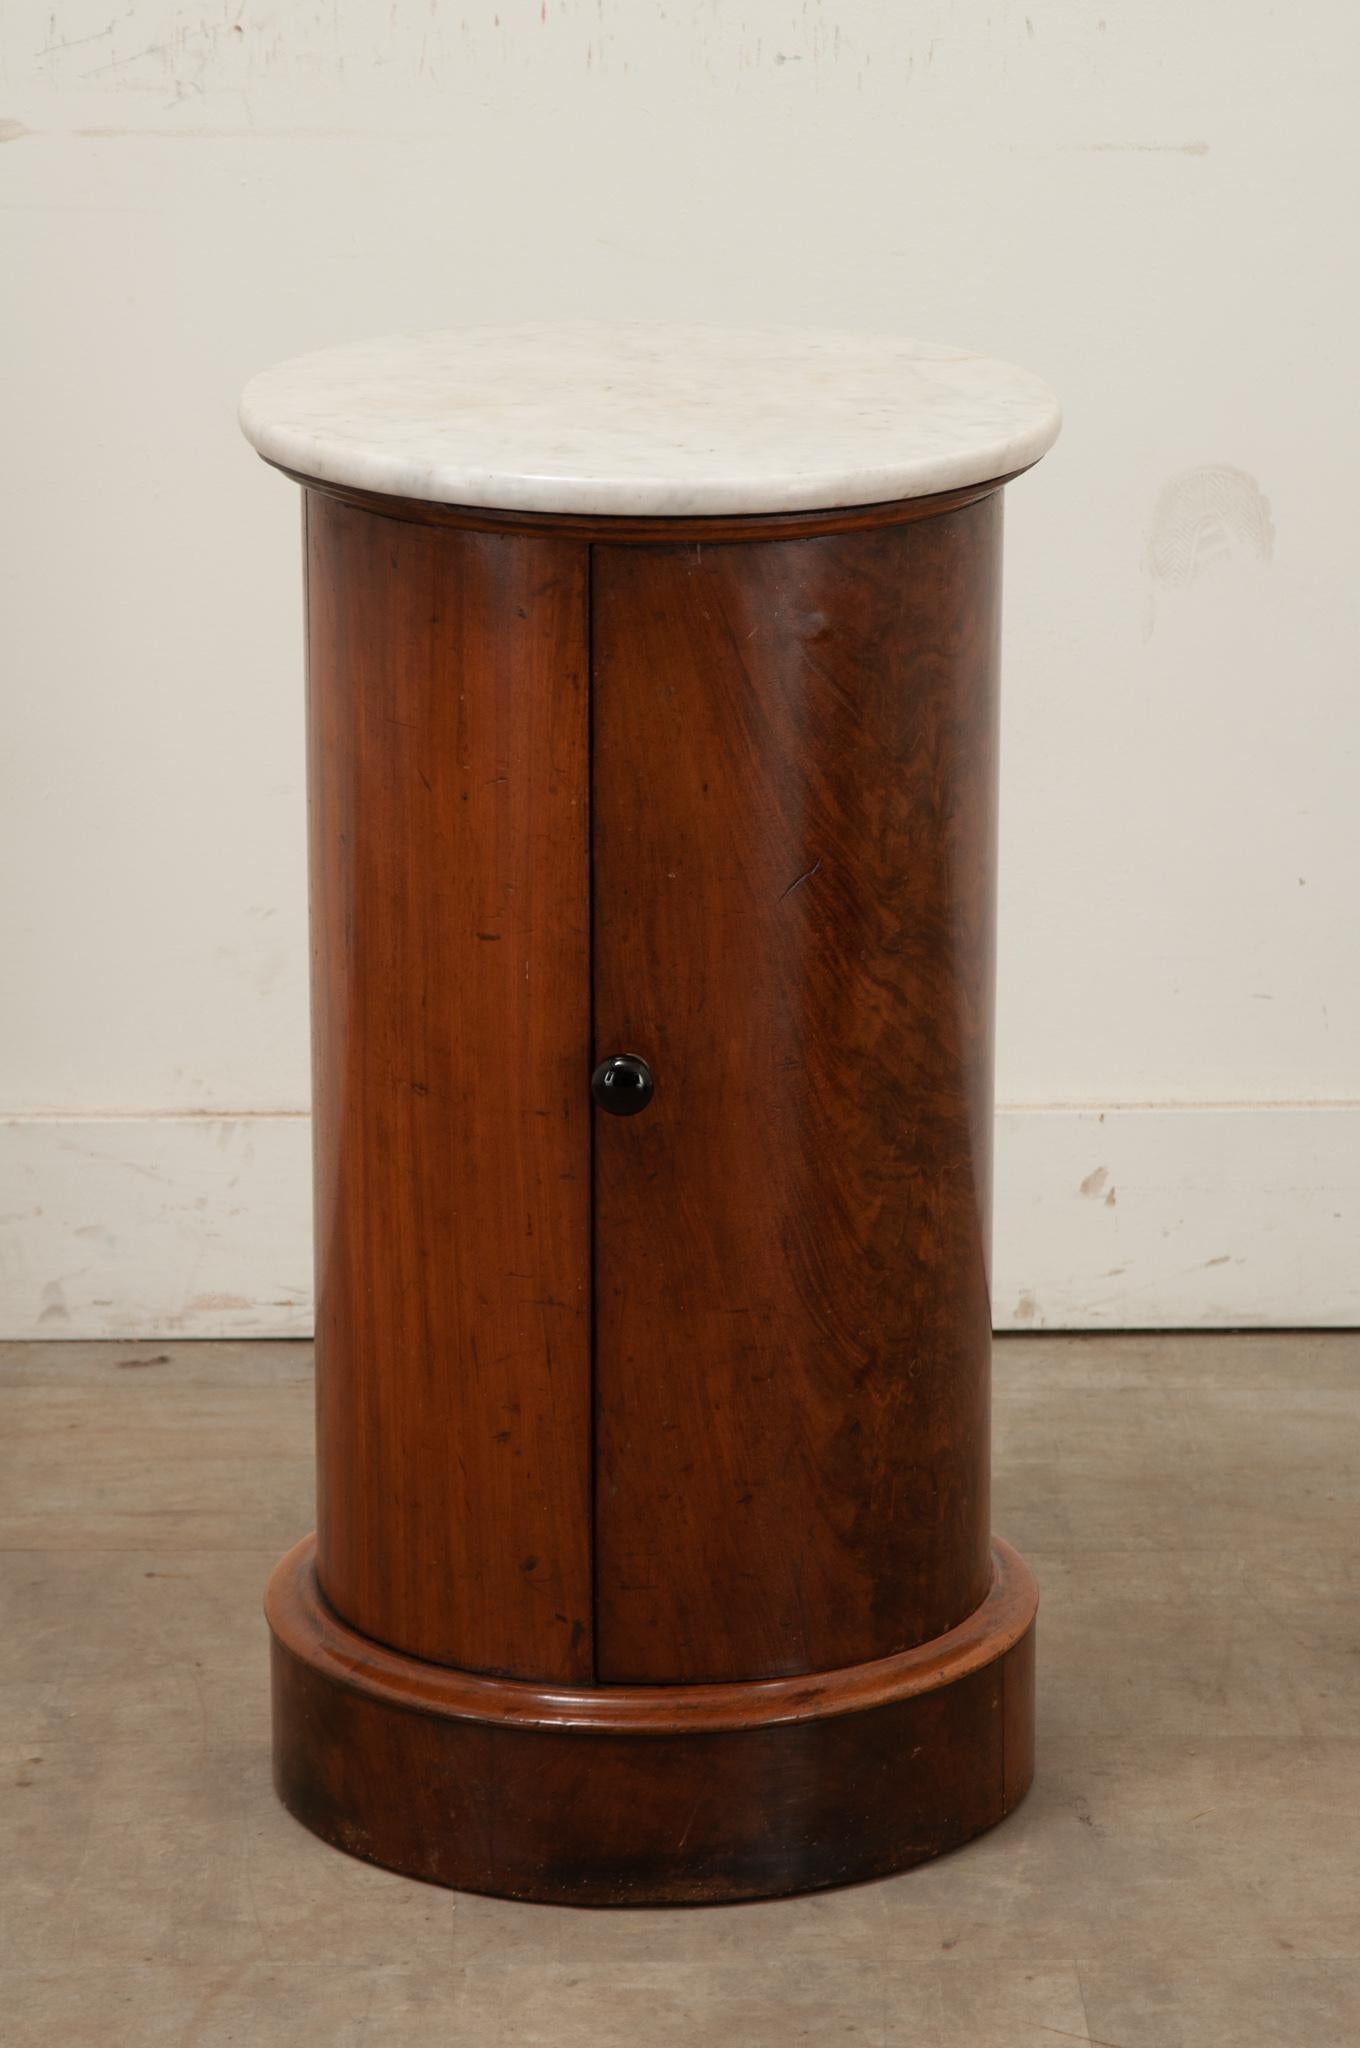 Other English Round Mahogany & Marble Bedside Table